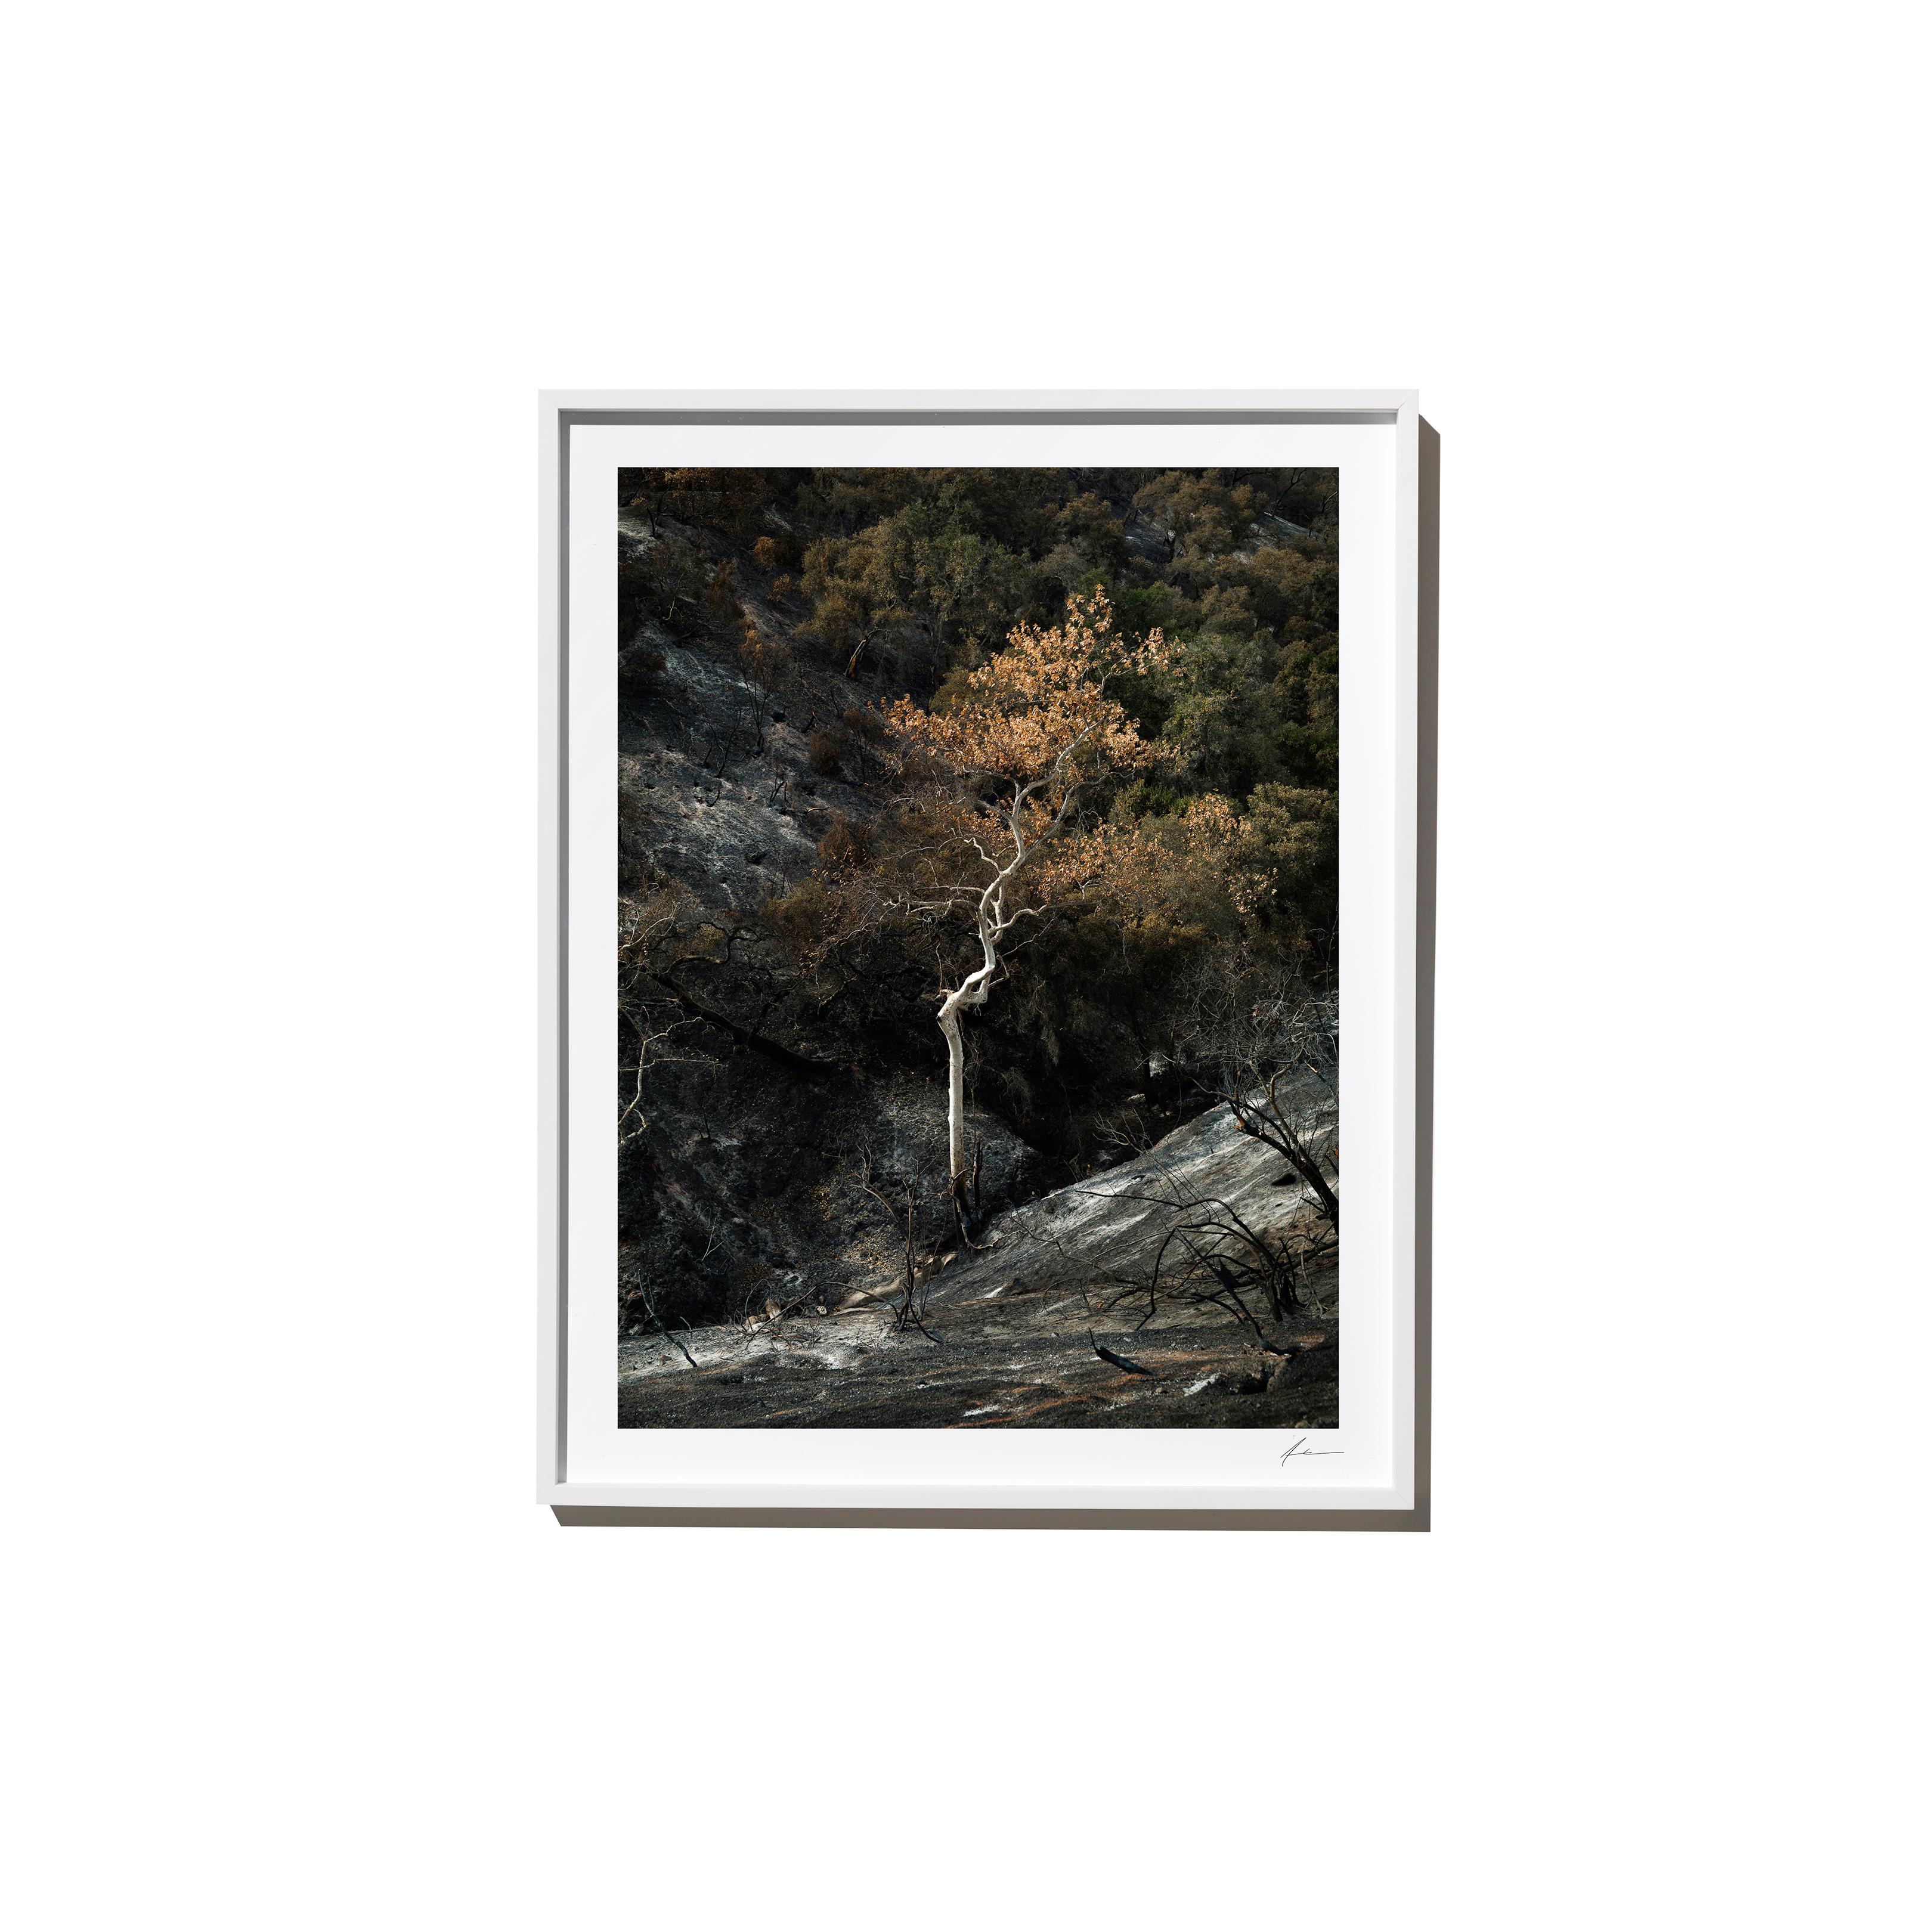 "White" is a framed color landscape photograph by Los Angeles-based photographer Timothy Hogan. 

Frame available in white or black, please specify on order. Please allow 15 days for production before shipping.

Editions and sizes as